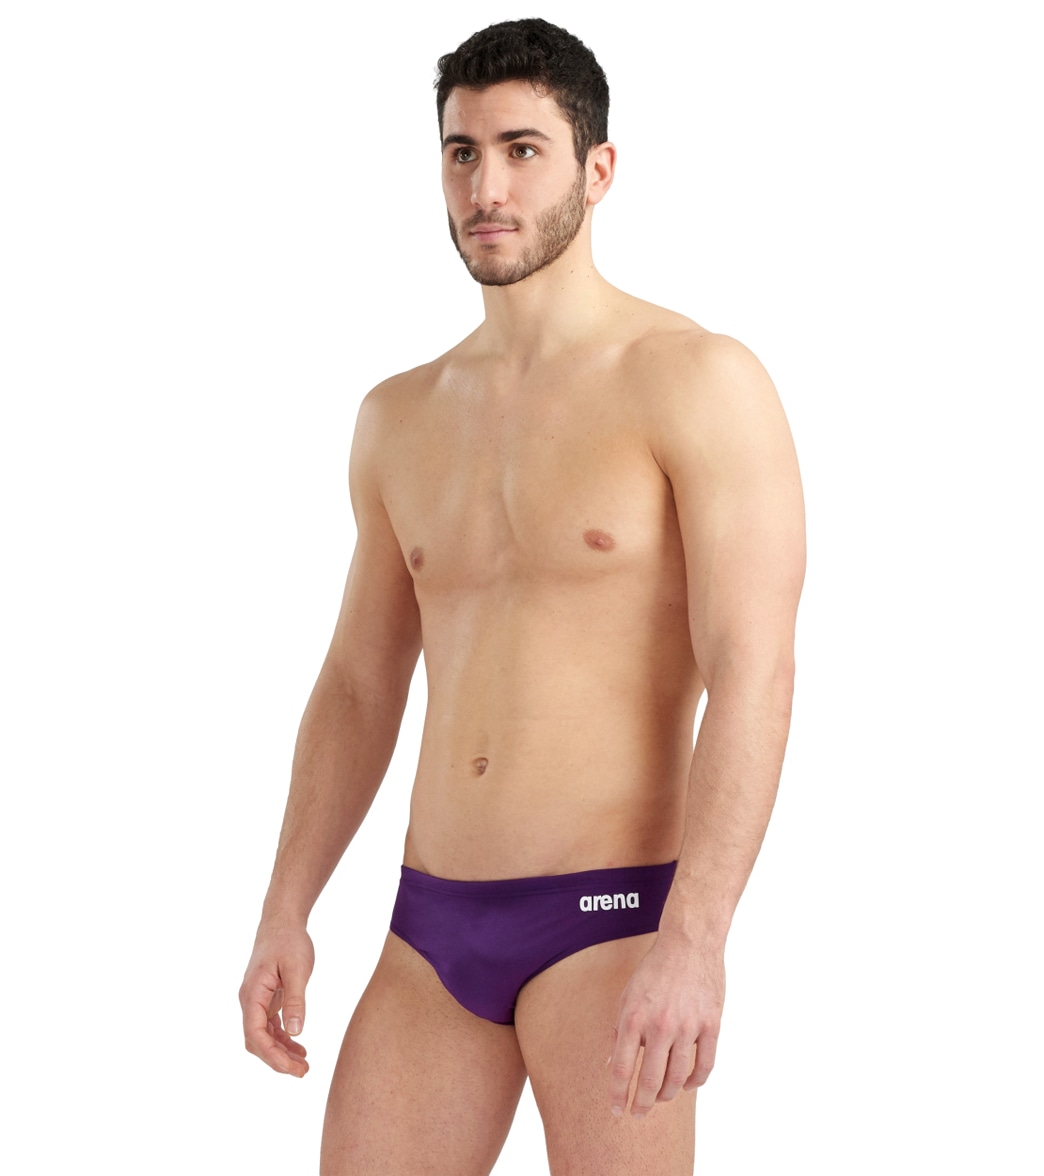 Arena Men's Solid Brief Swimsuit - Plum/White 36 Polyester - Swimoutlet.com